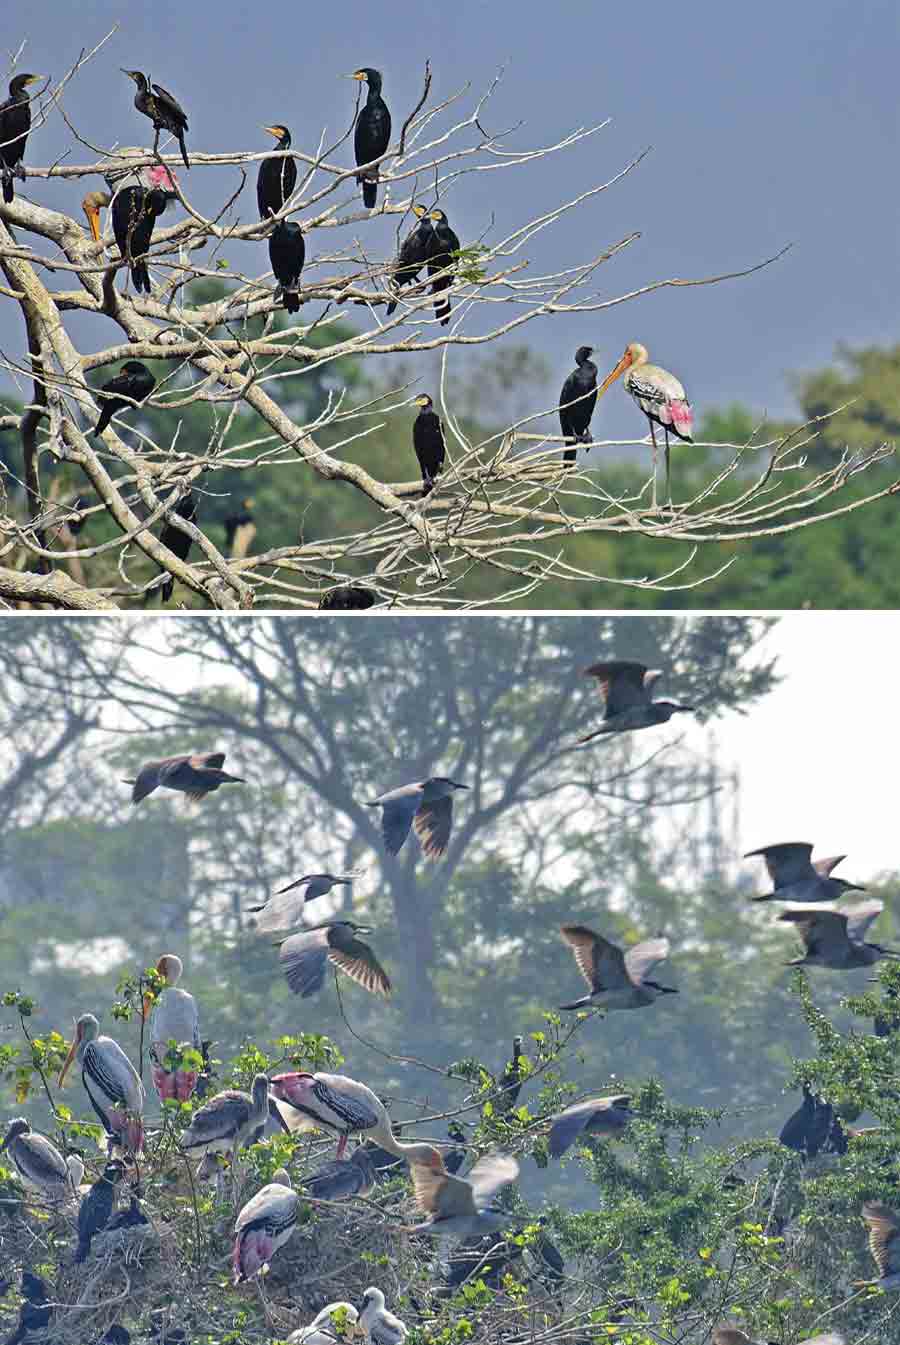 Several migratory birds have arrived at the Rabindra Sarobar island this winter 